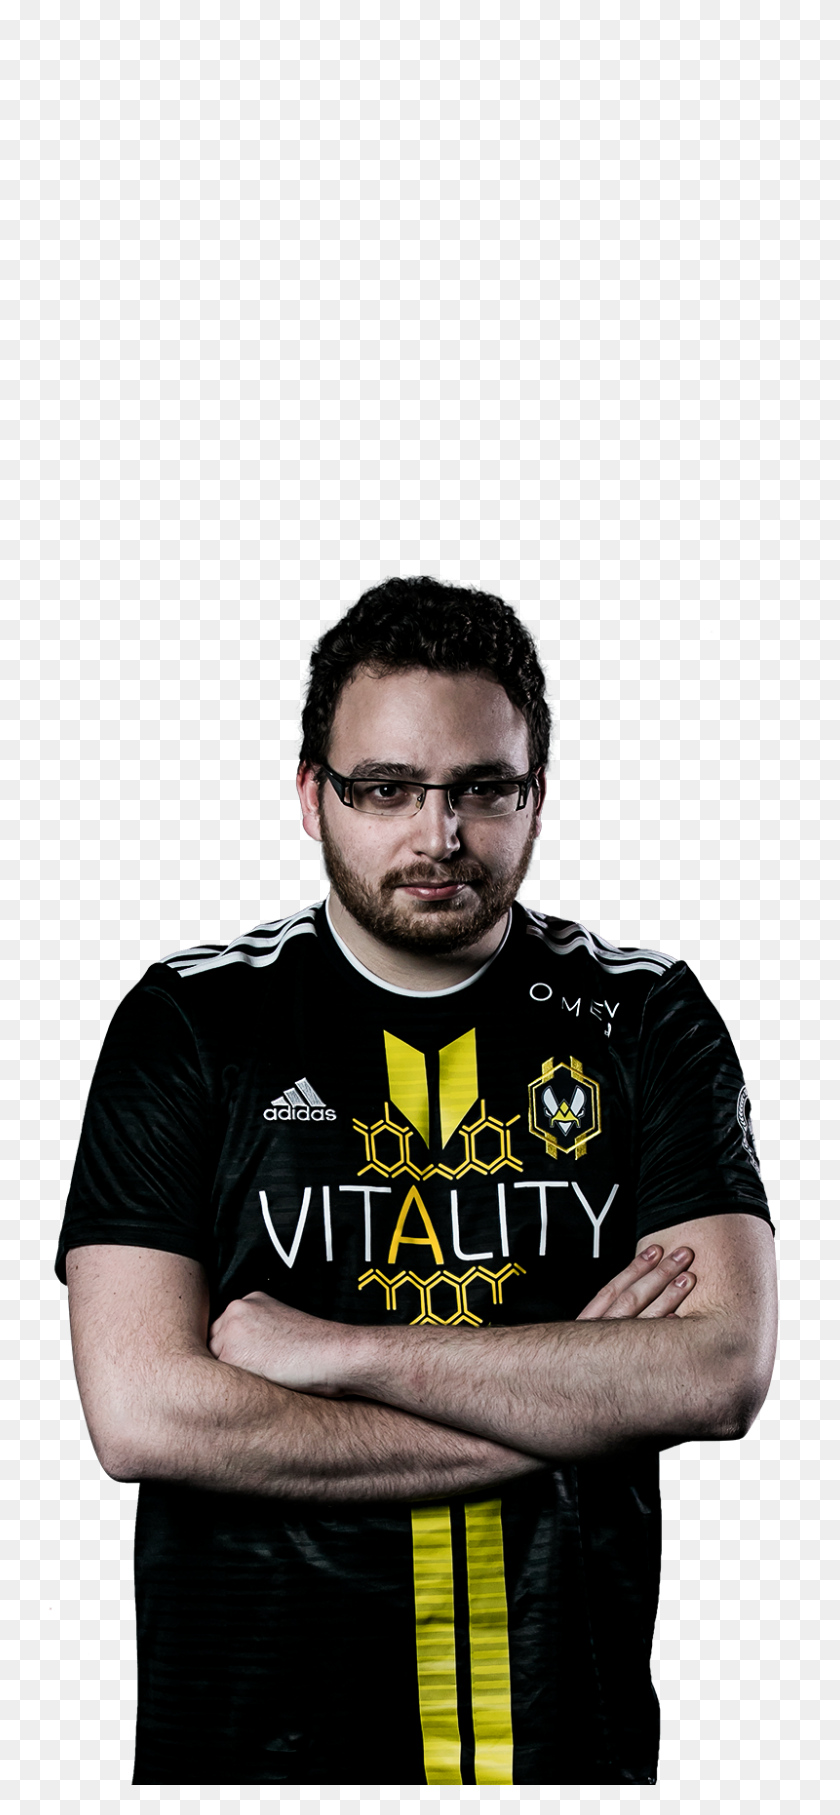 800x1800 Team Vitality - Street Fighter PNG